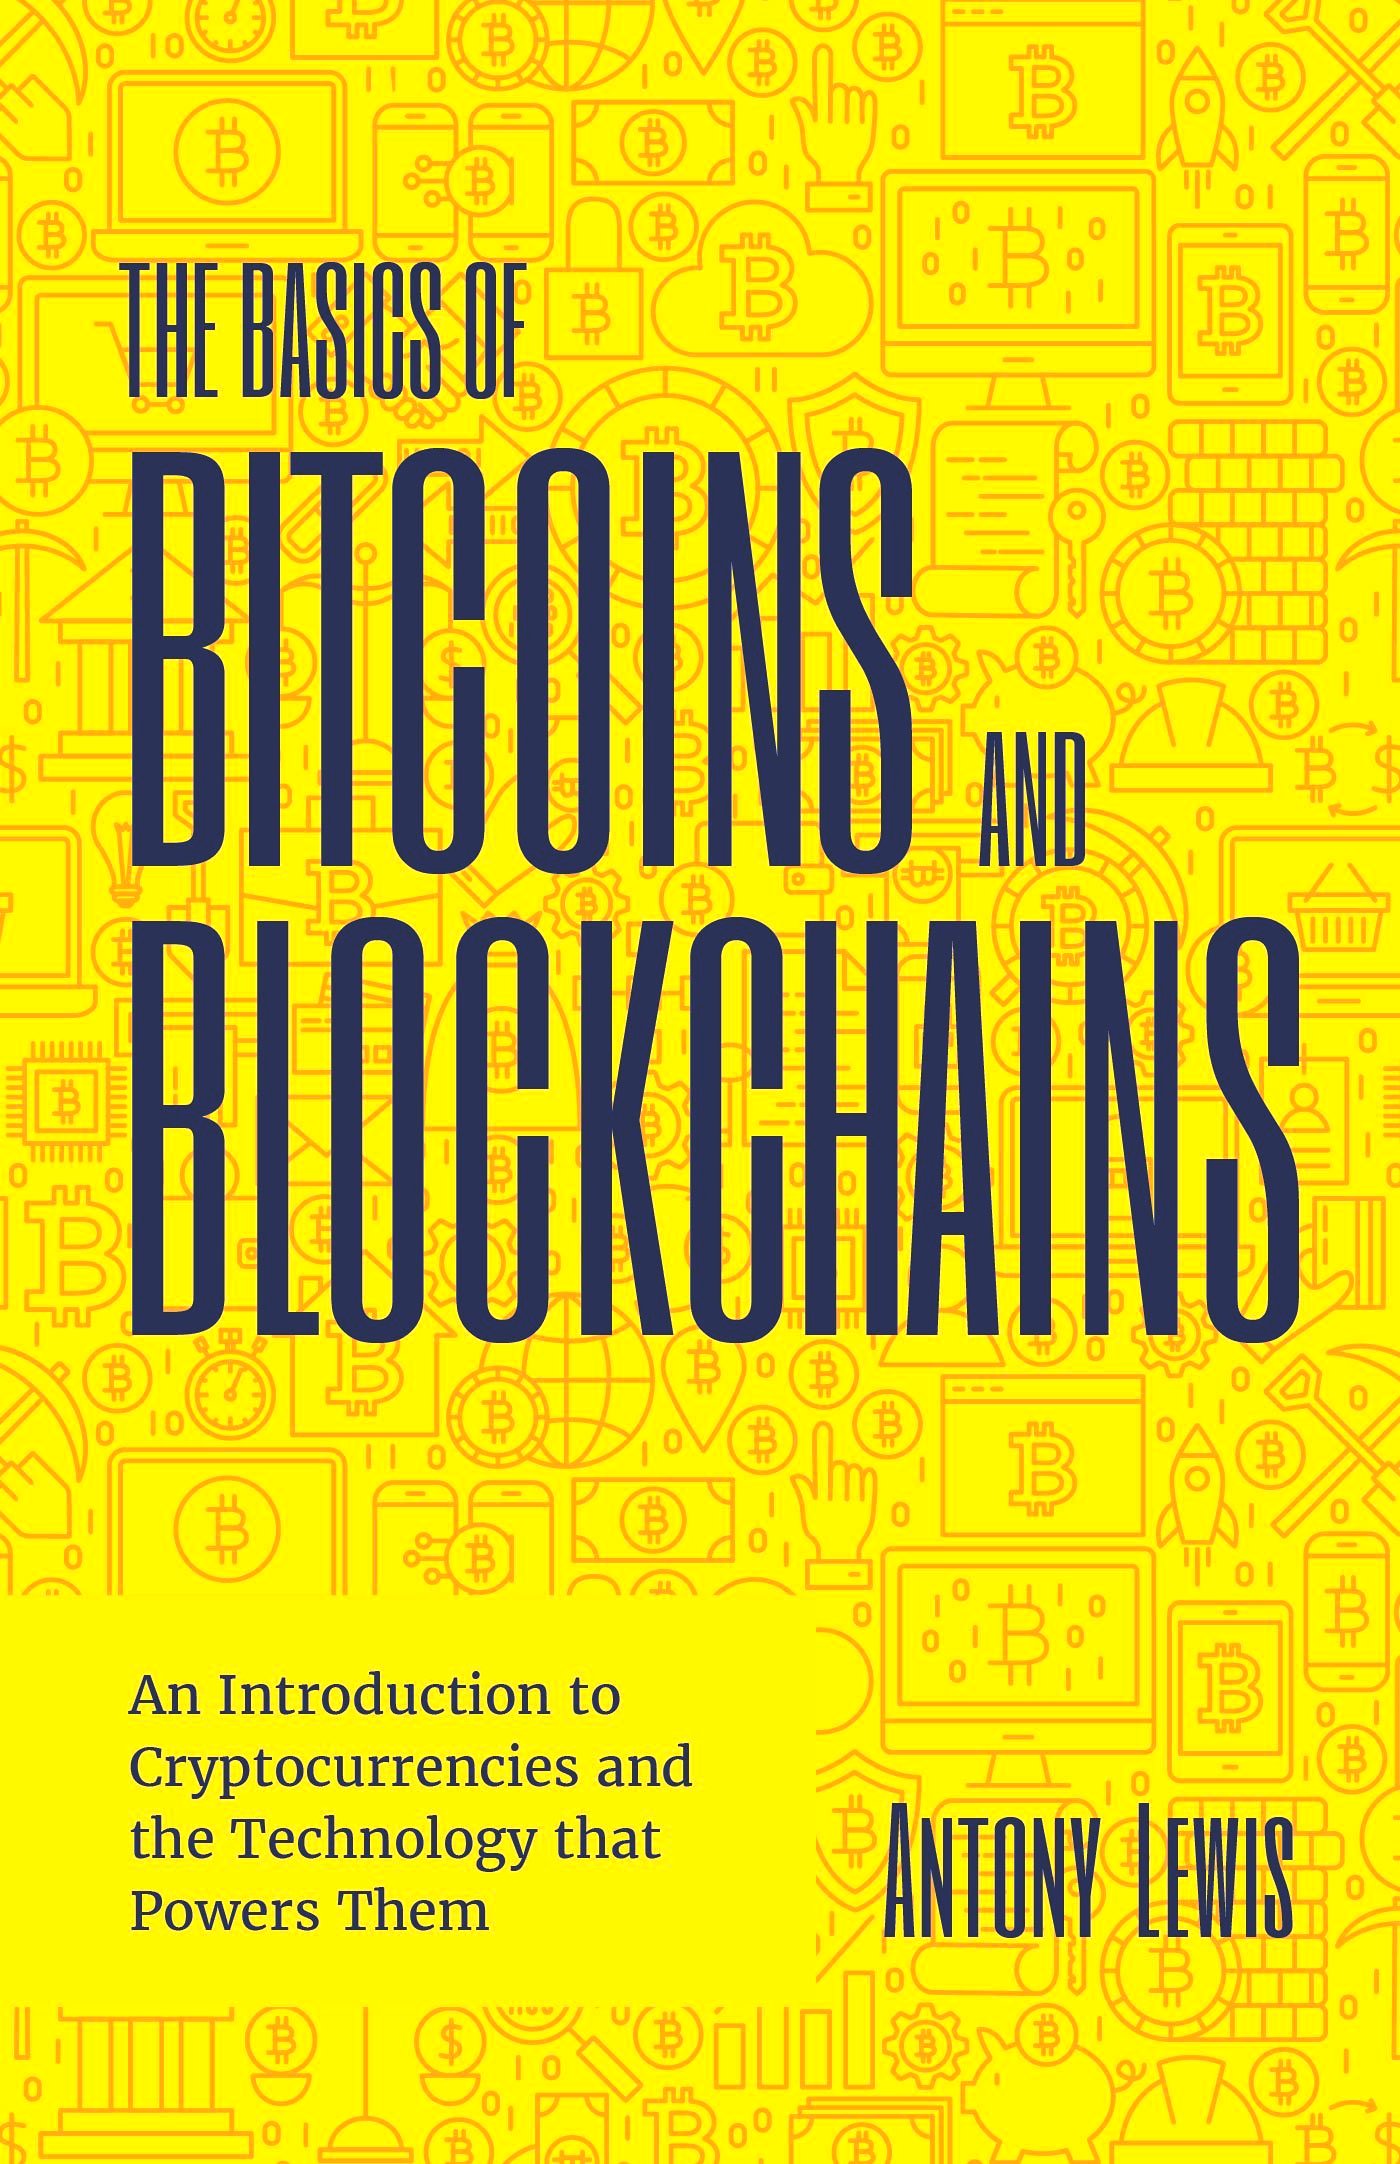 The Basics of Bitcoins and Blockchains Free PDF Book